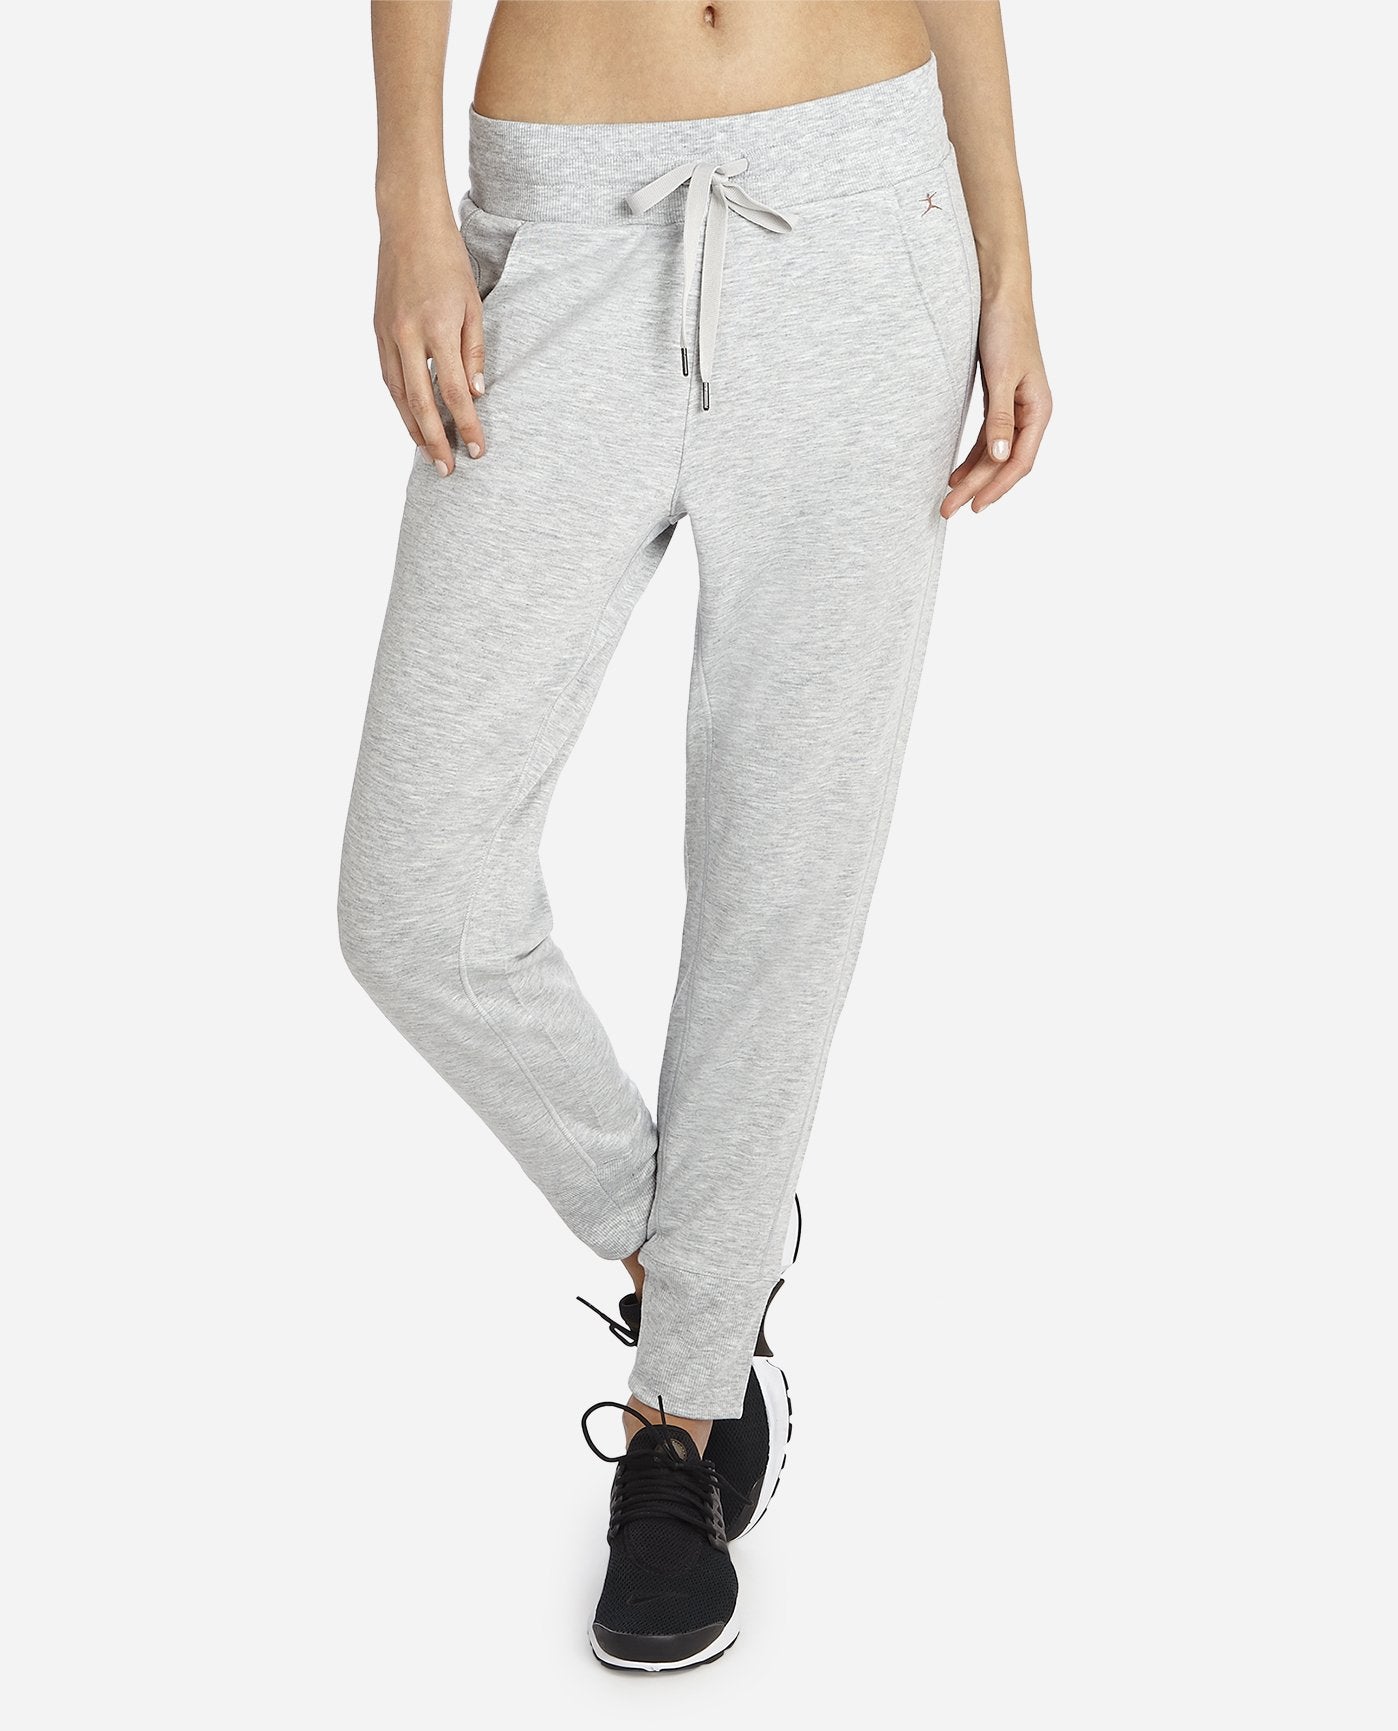 Joggers For Women and Sweatpants